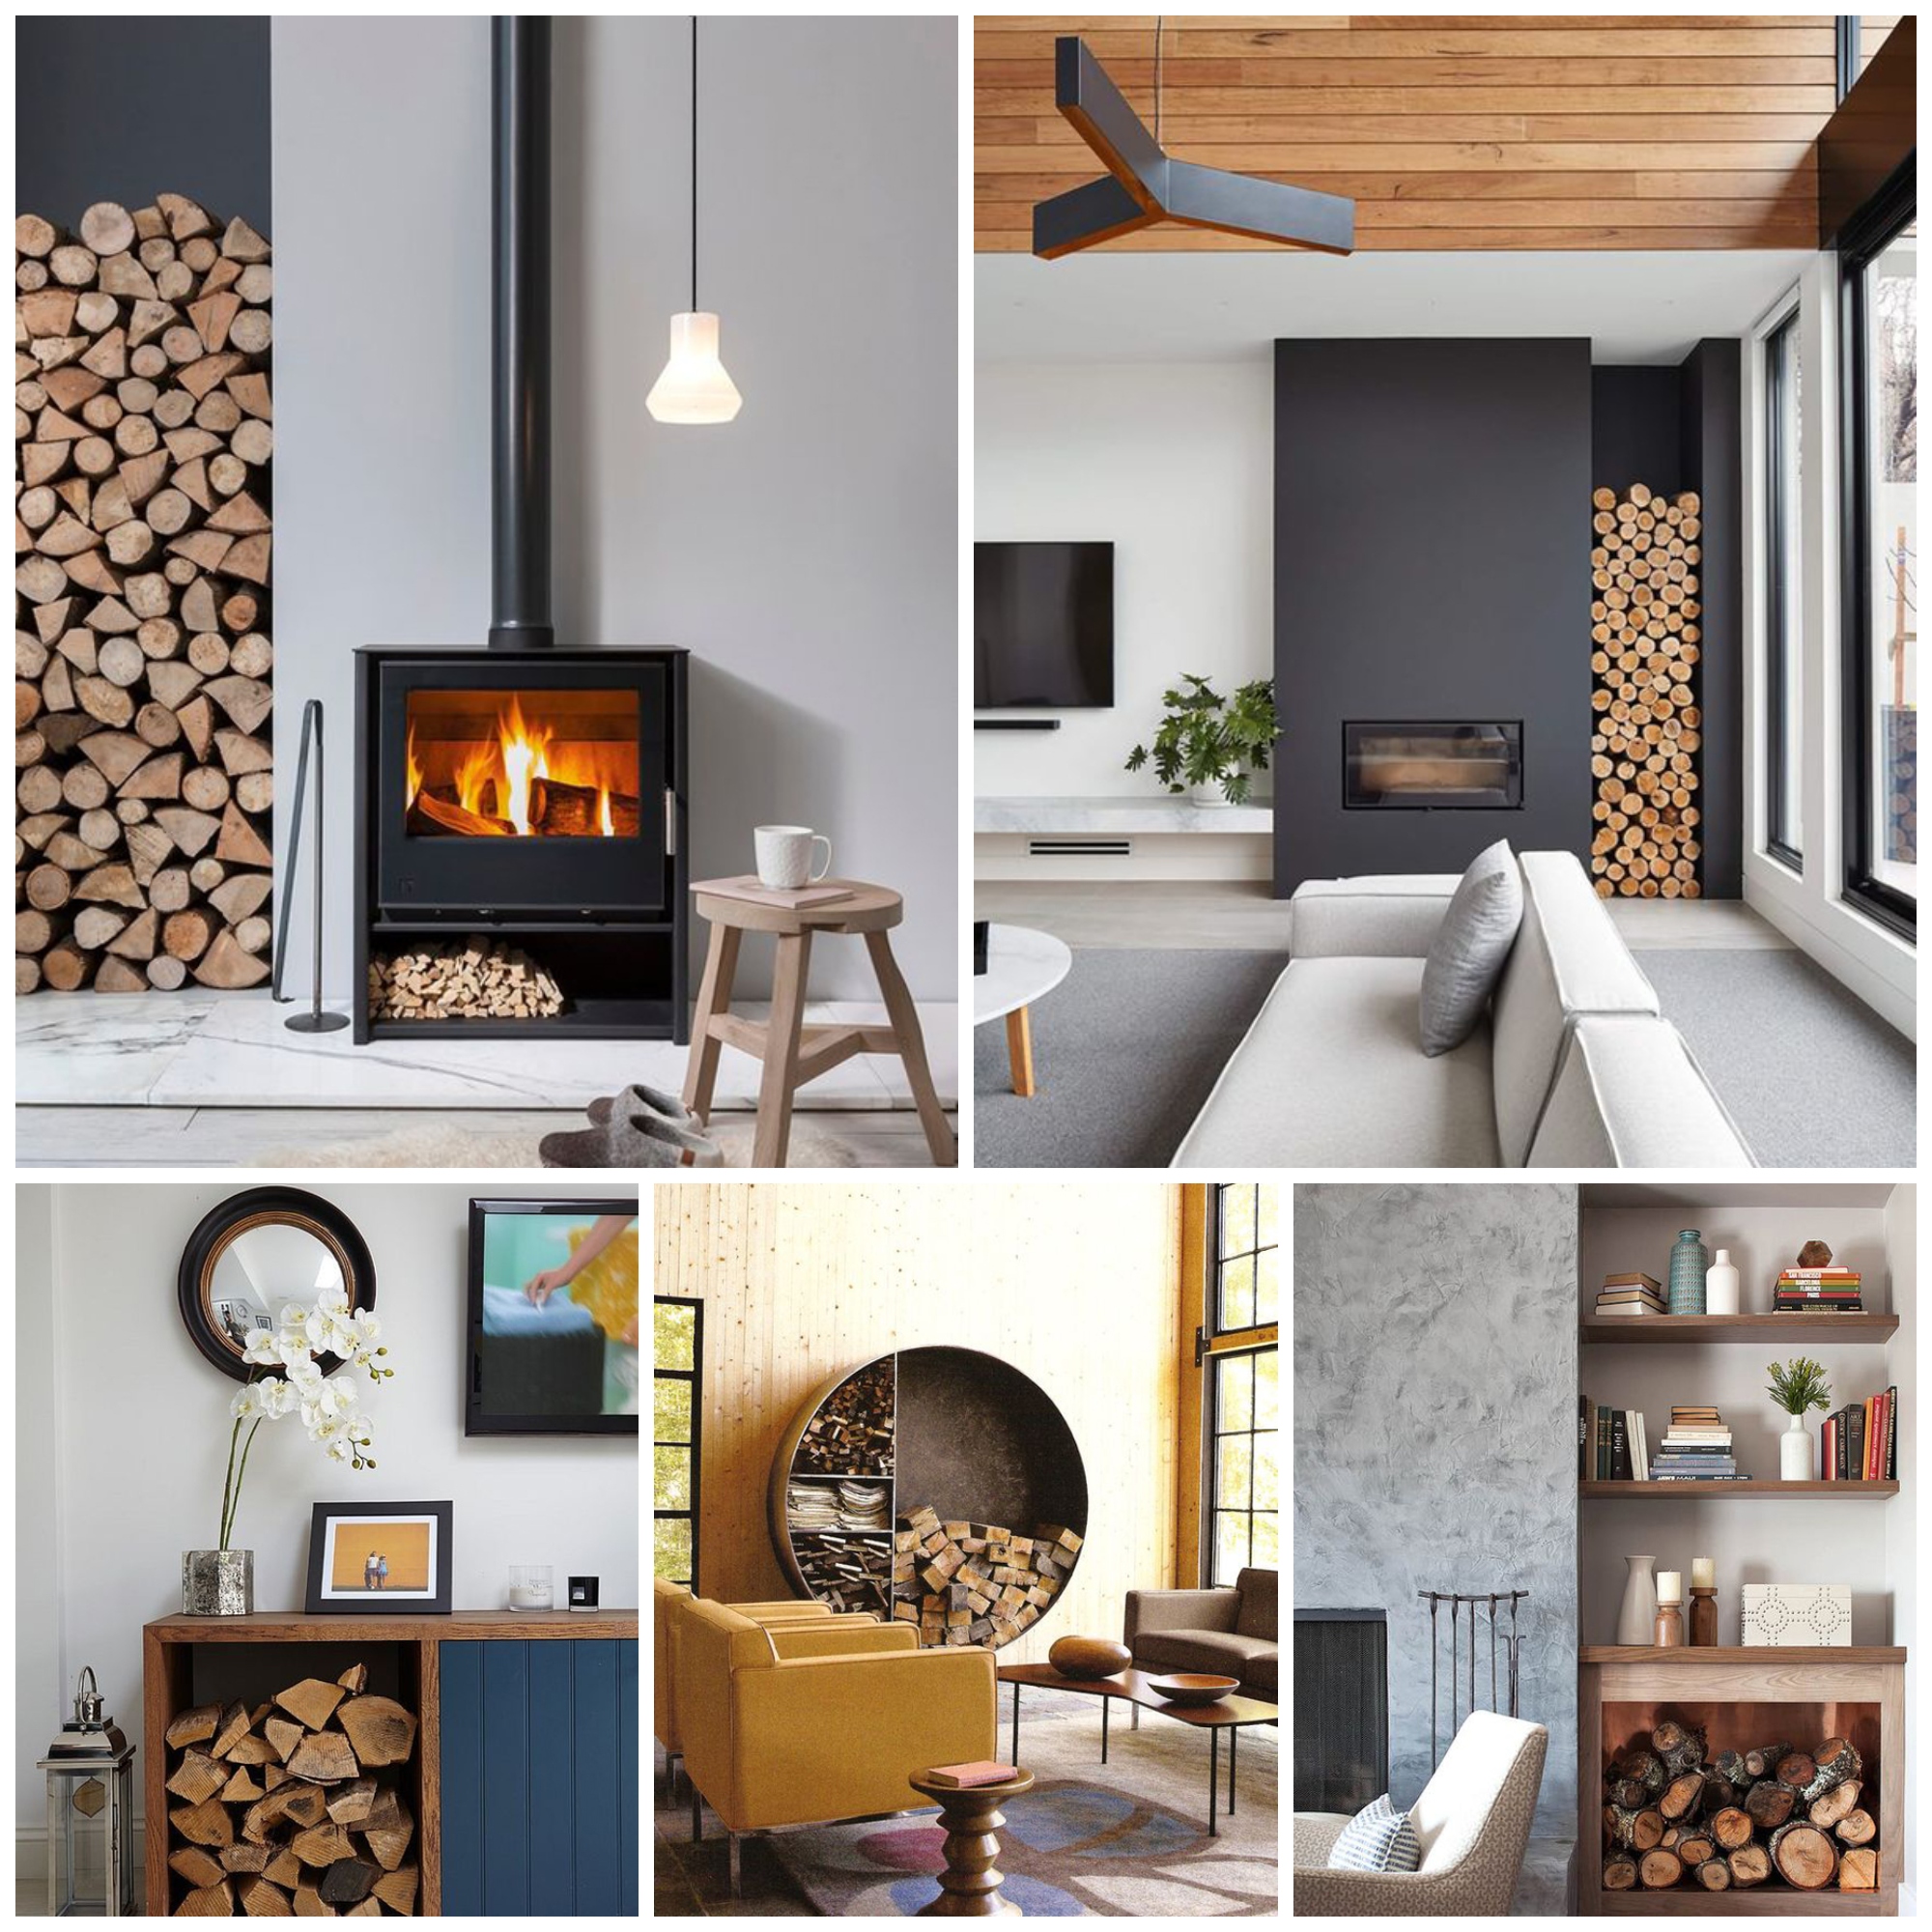 Creative Ways To Store Firewood Into Your Interior